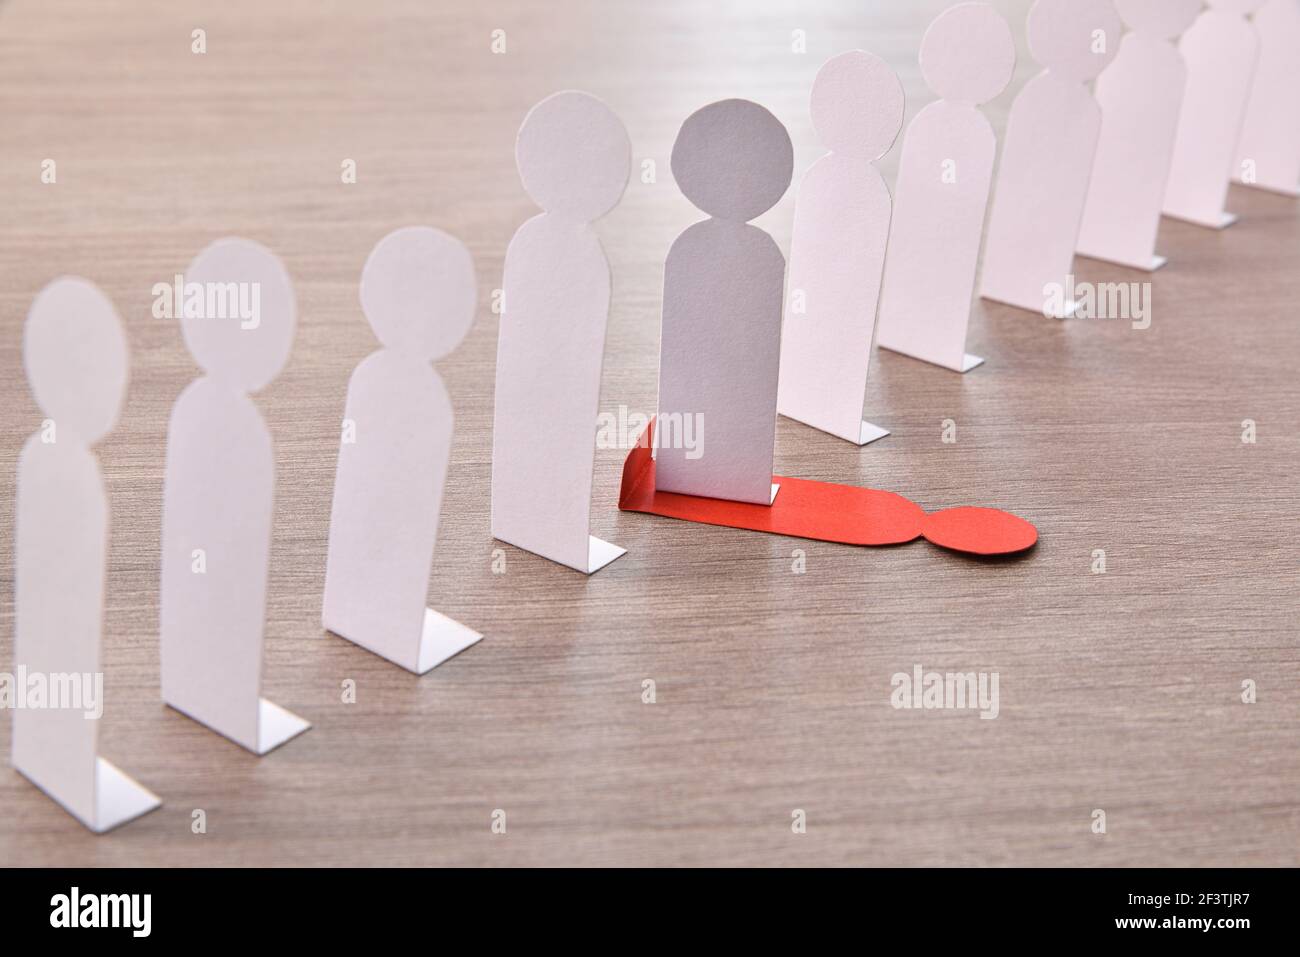 Concept of social exclusion with many little white paper men lined up and one stepping on a different one on wooden base elevated view. Stock Photo